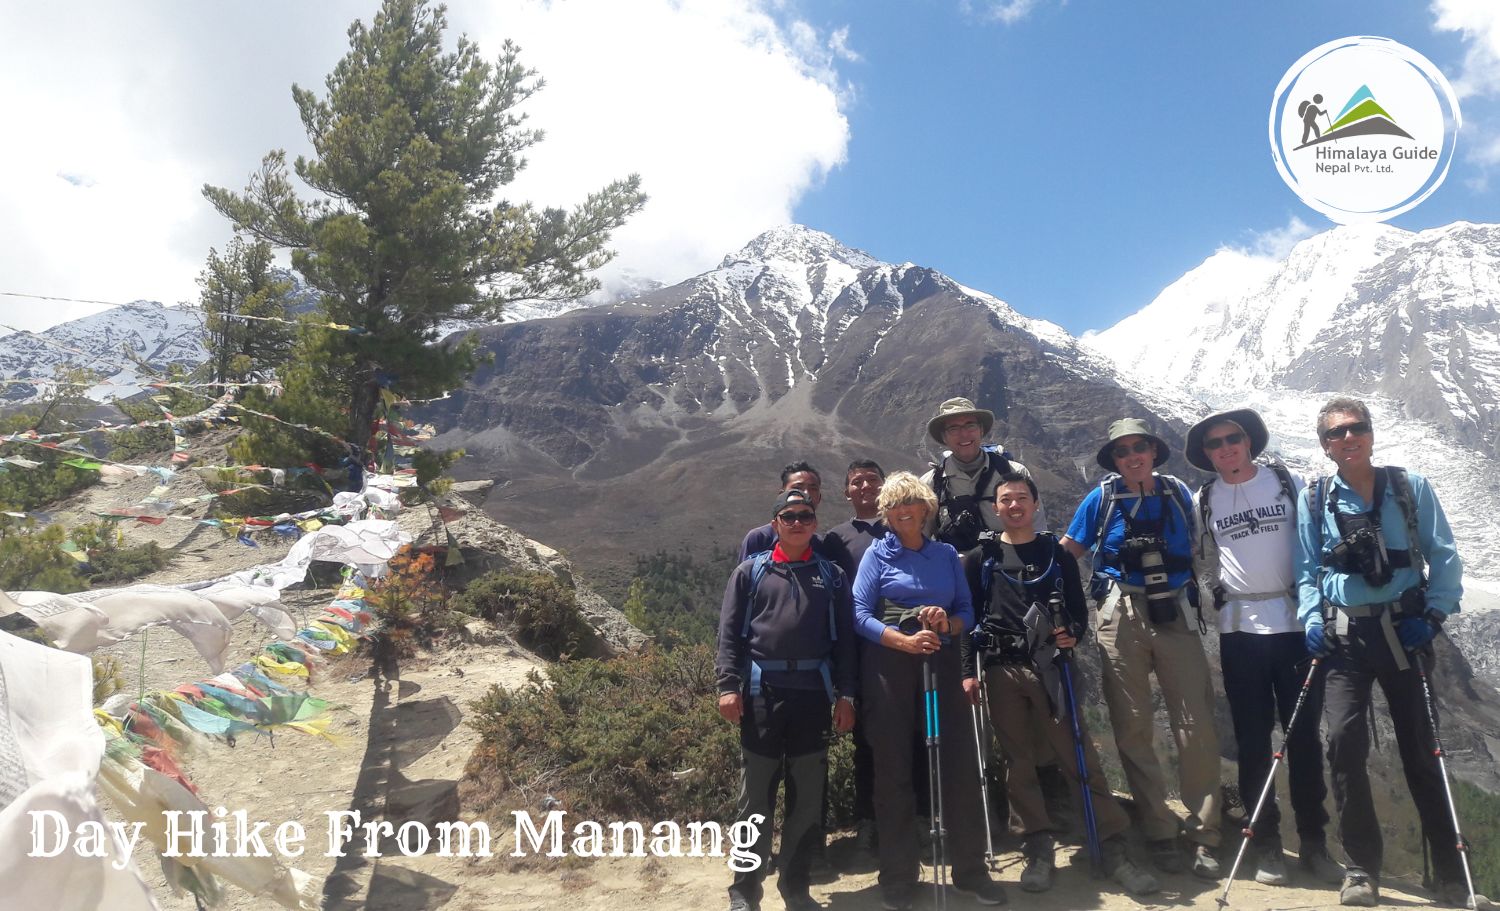 Day hike from Manang Village